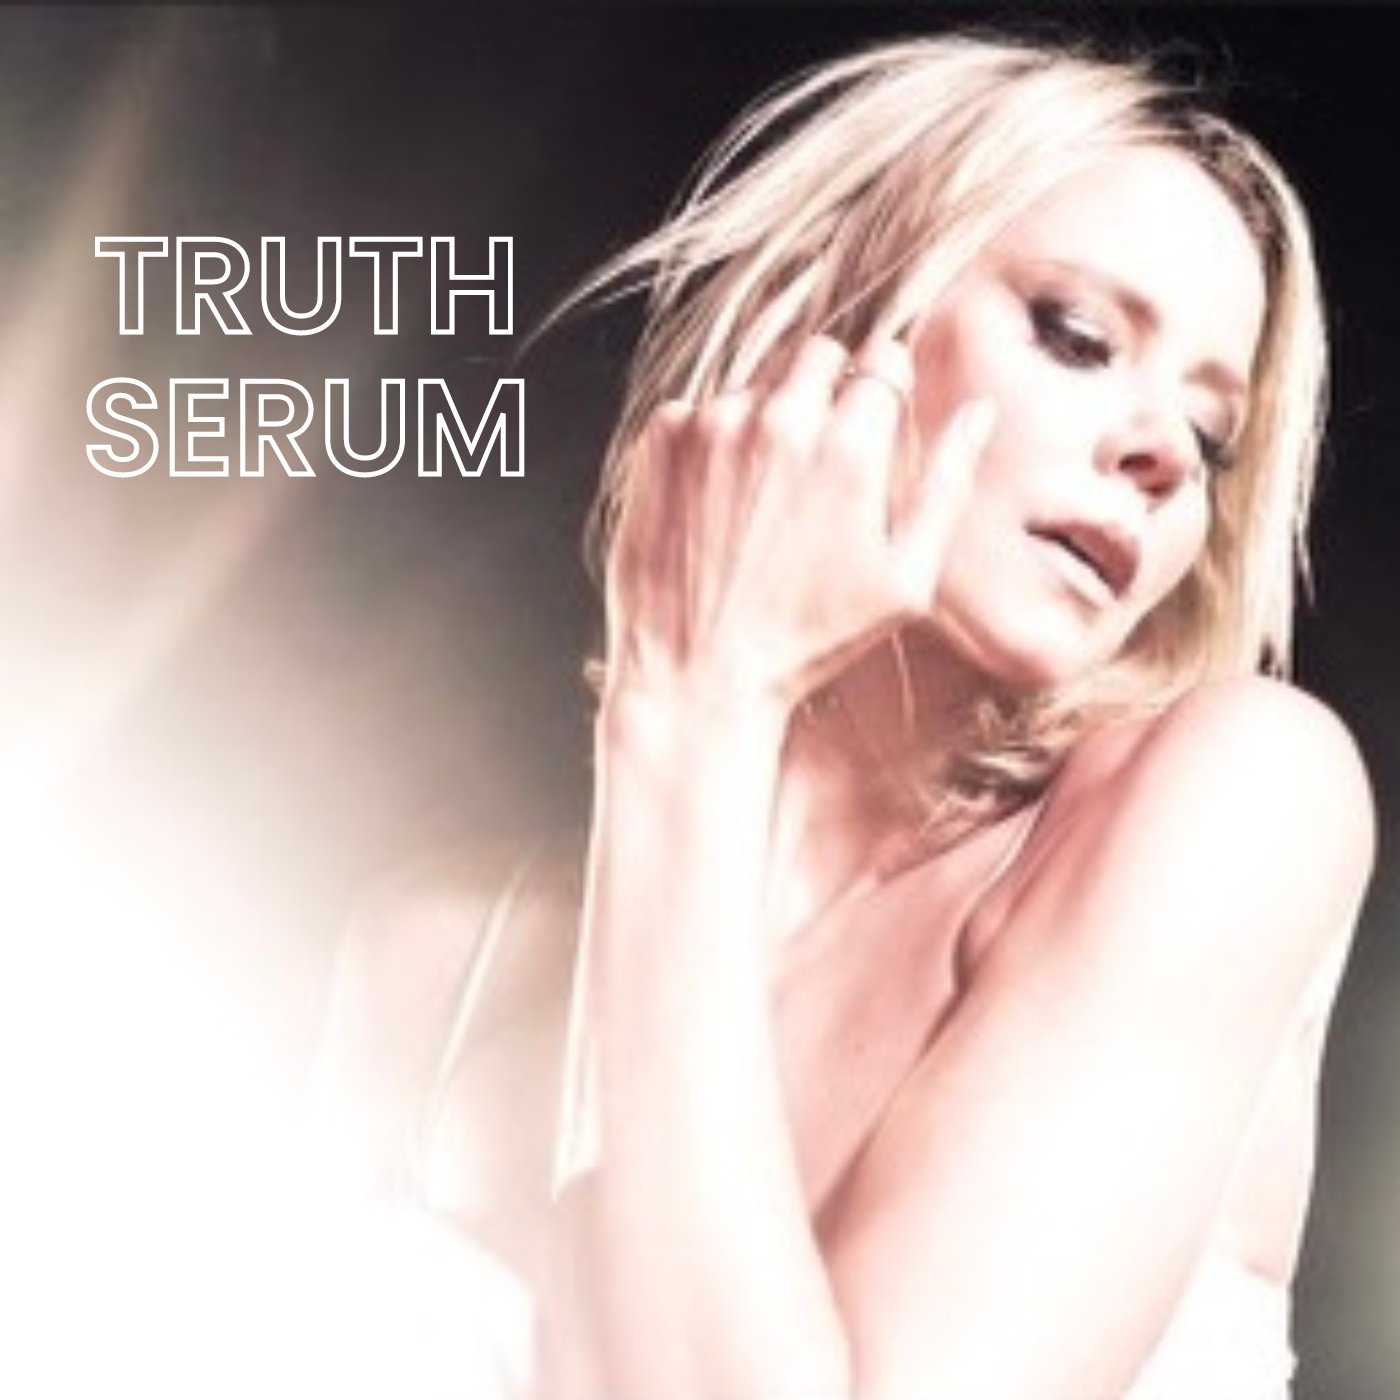 Truth Serum (Final Cover) - for April 19 release.jpg